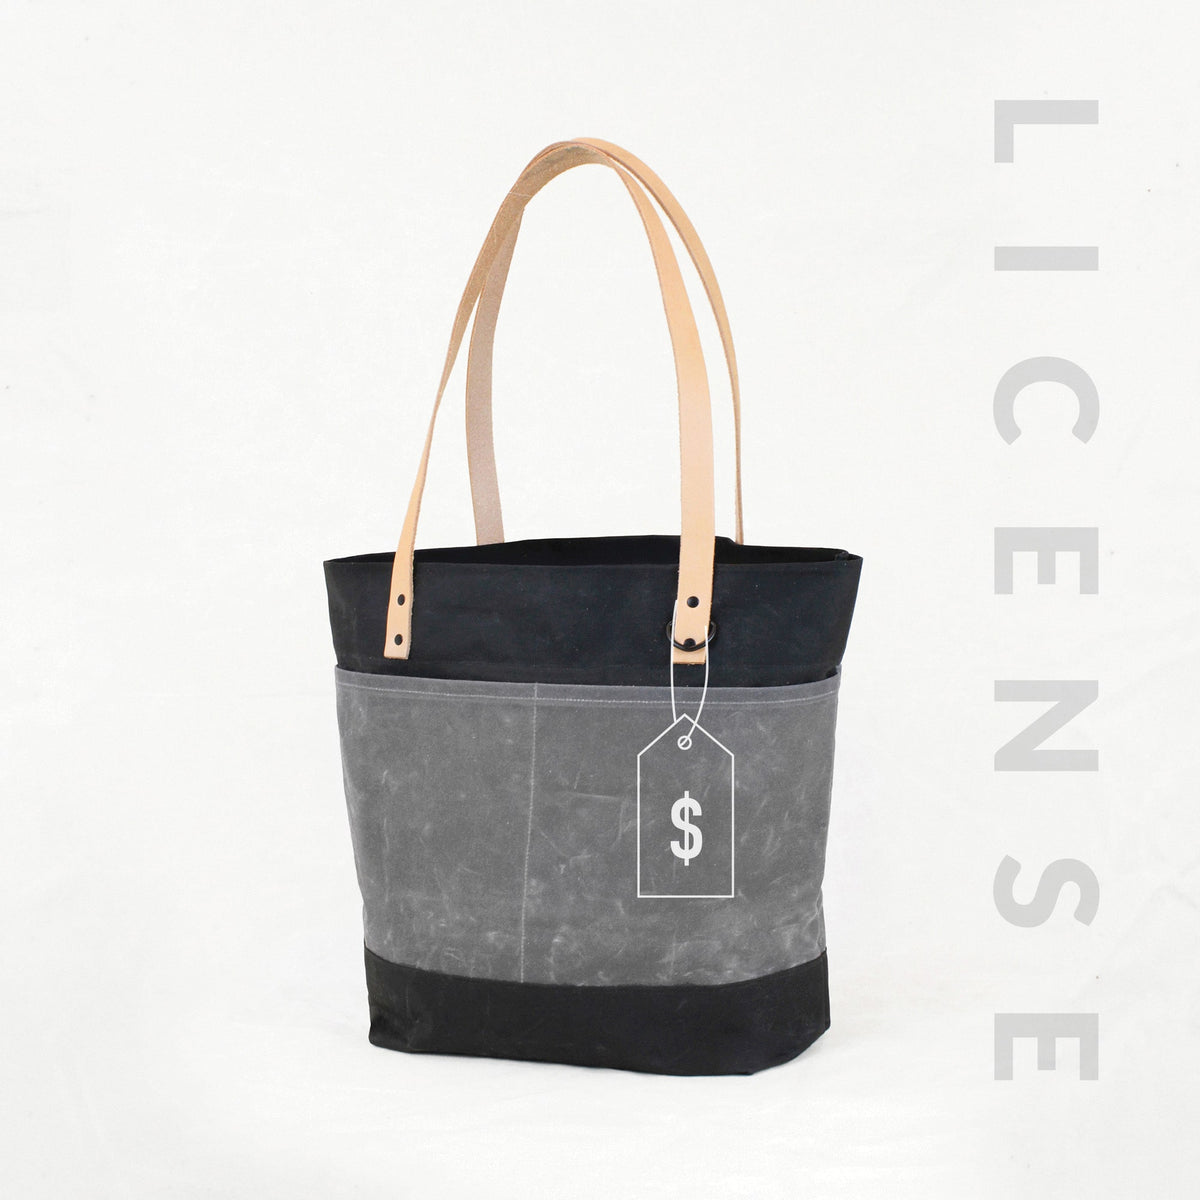 Oberlin Tote - License to Sell